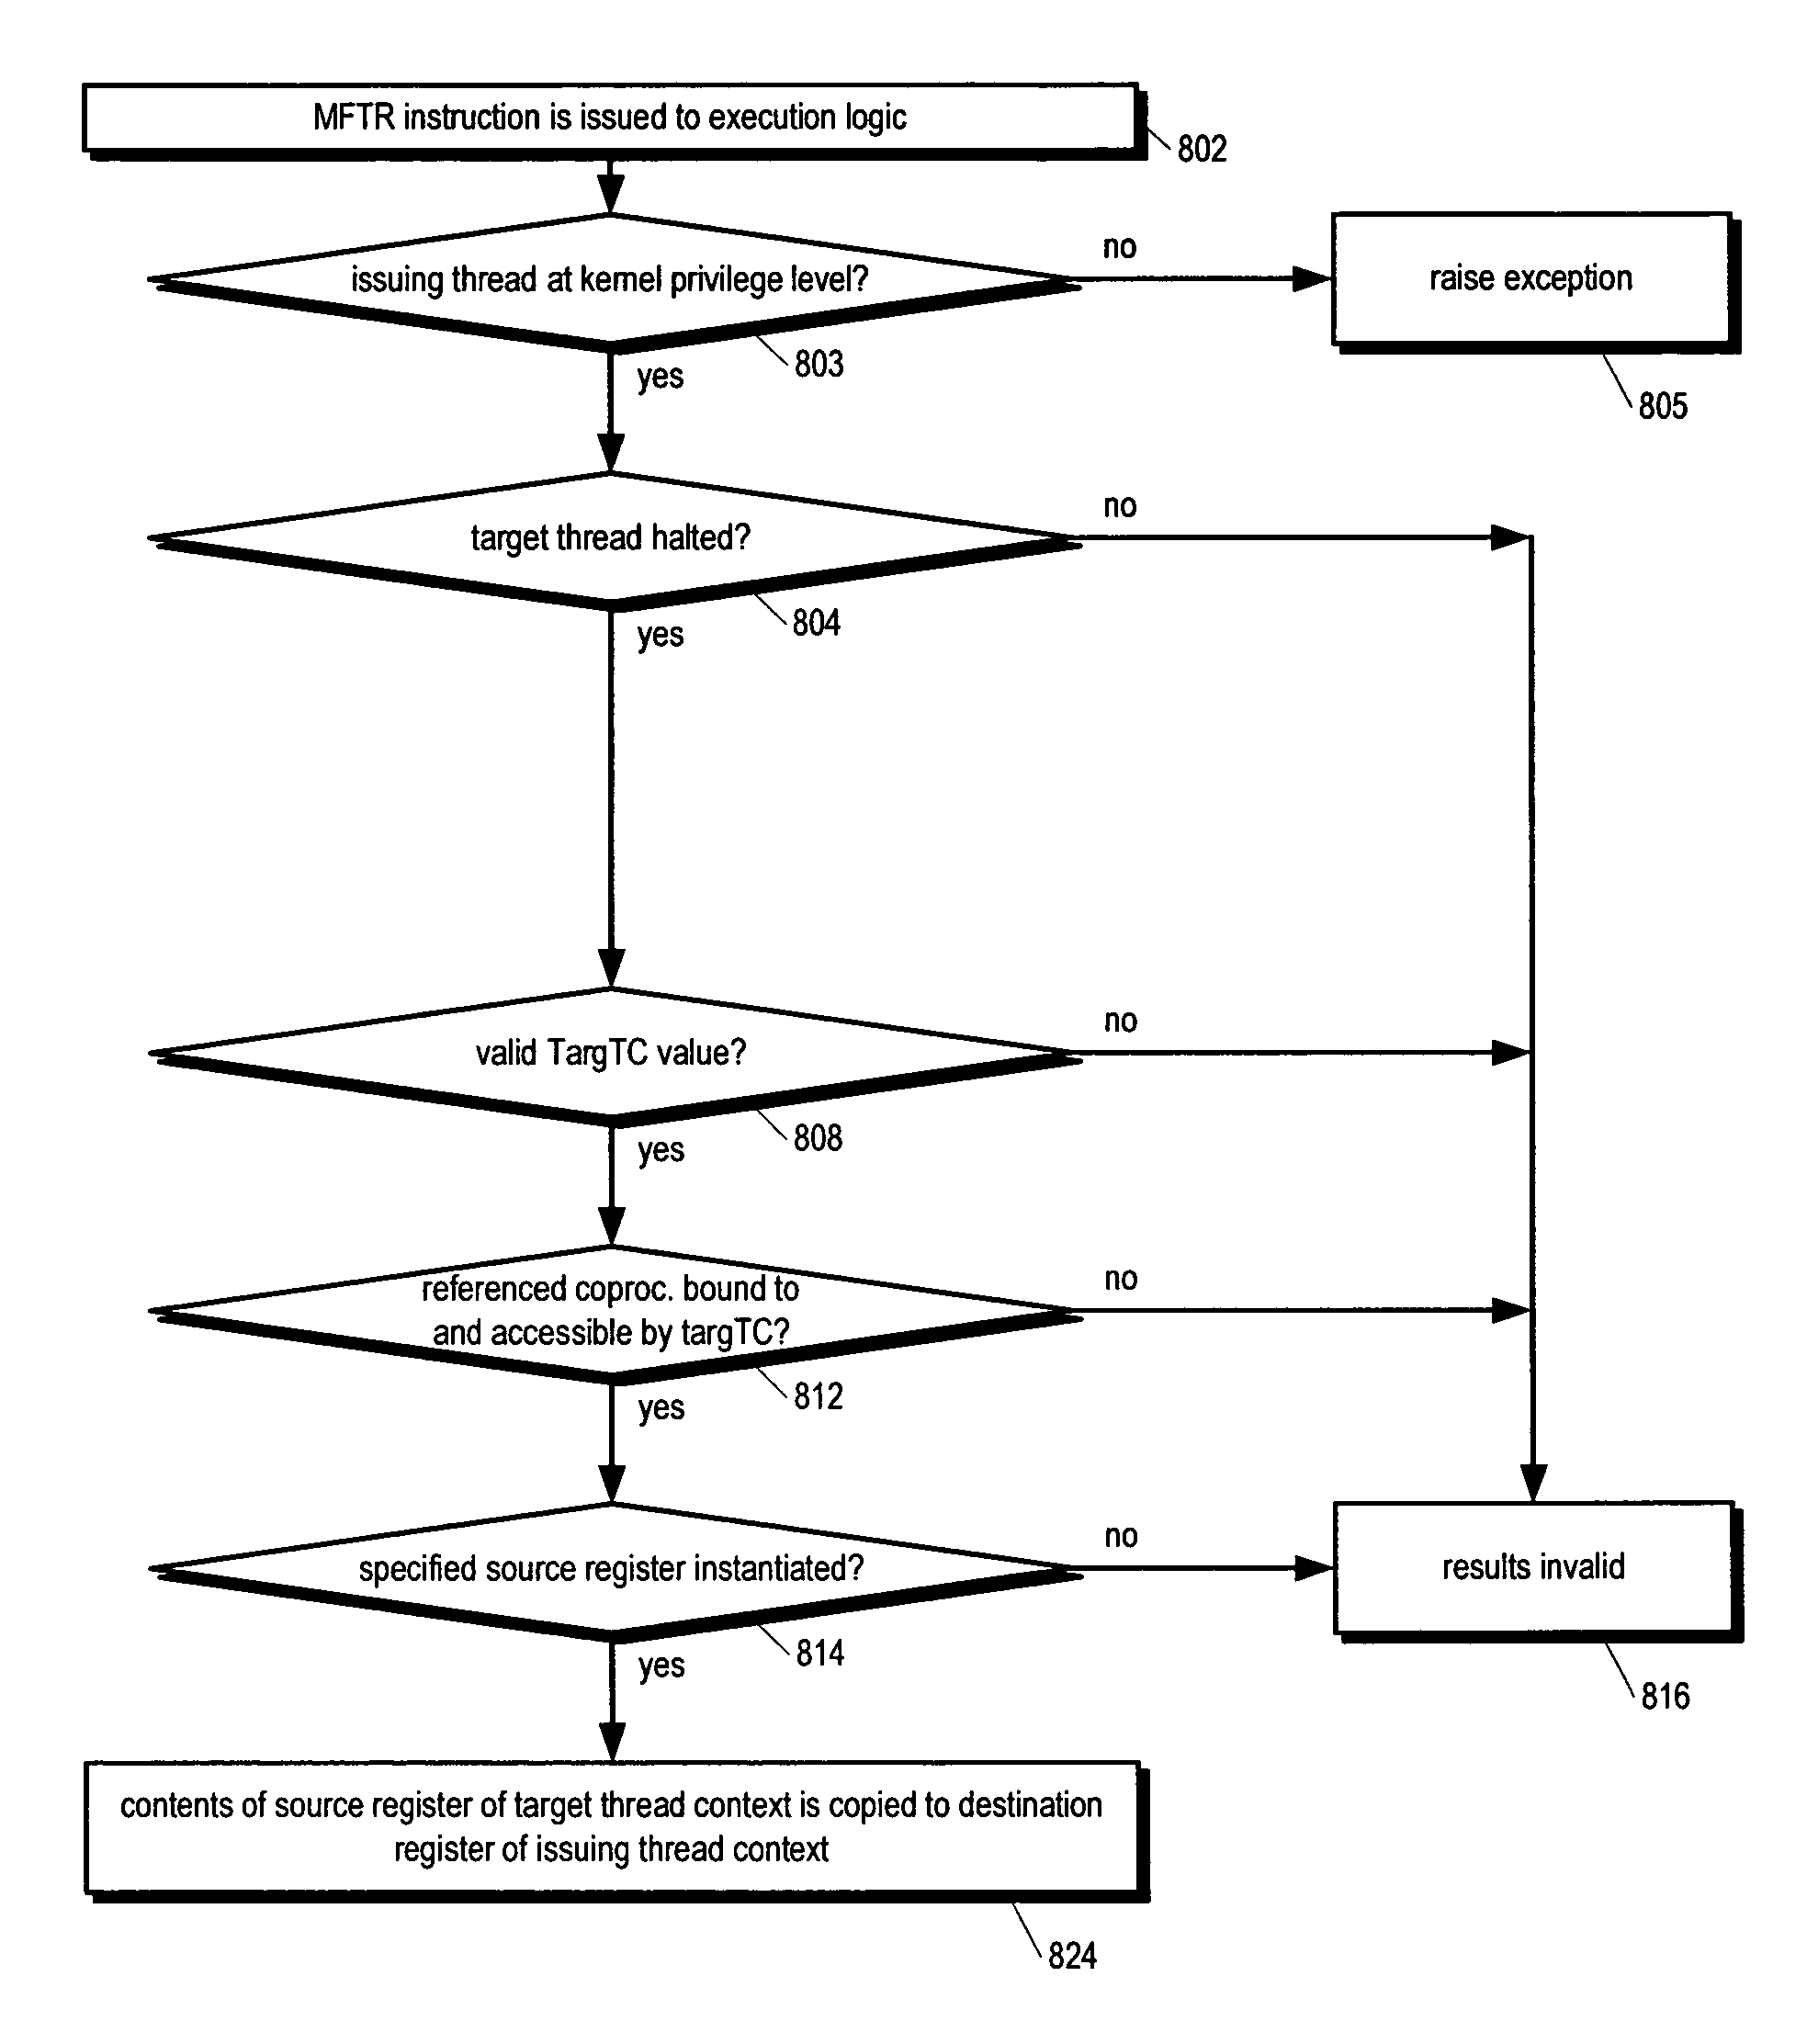 Symmetric multiprocessor operating system for execution on non-independent lightweight thread context